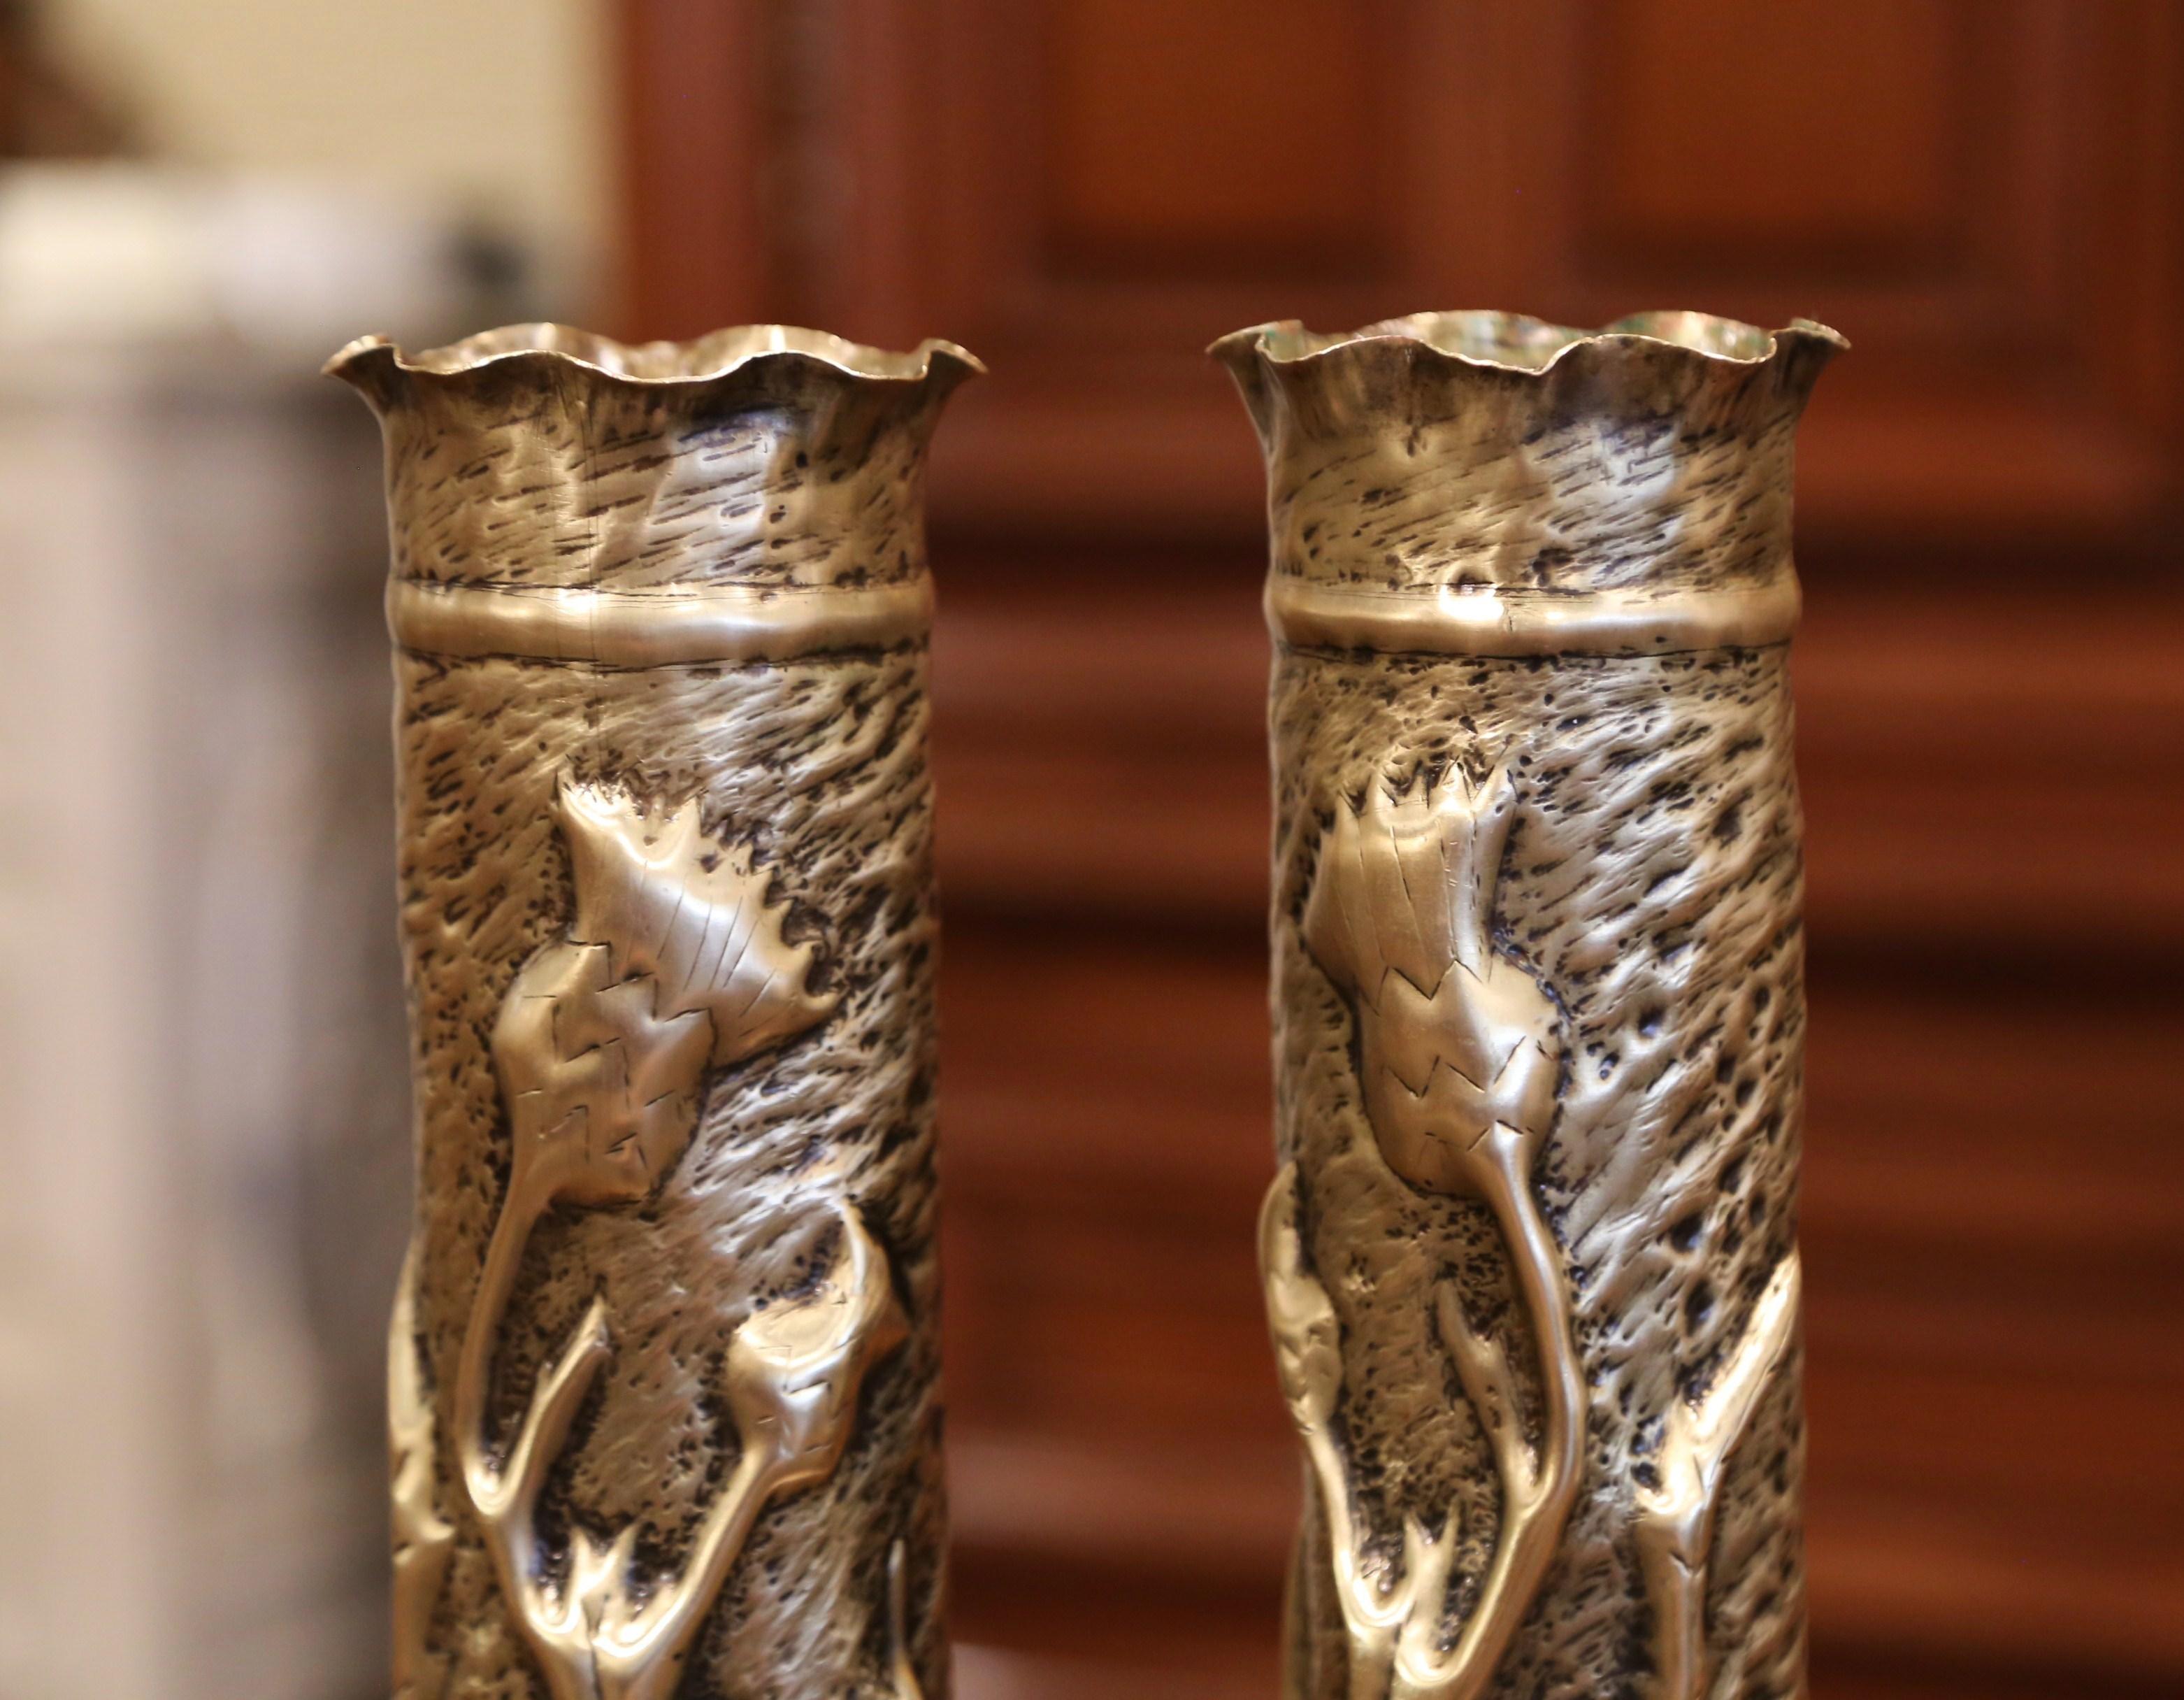 Decorate a man's office or a study display shelf with this pair of antique trench art shell vases from France, circa 1915. Made of brass, the artillery shell casing vases feature repousse floral and leaf decor over a scalloped top rim. Both WWI